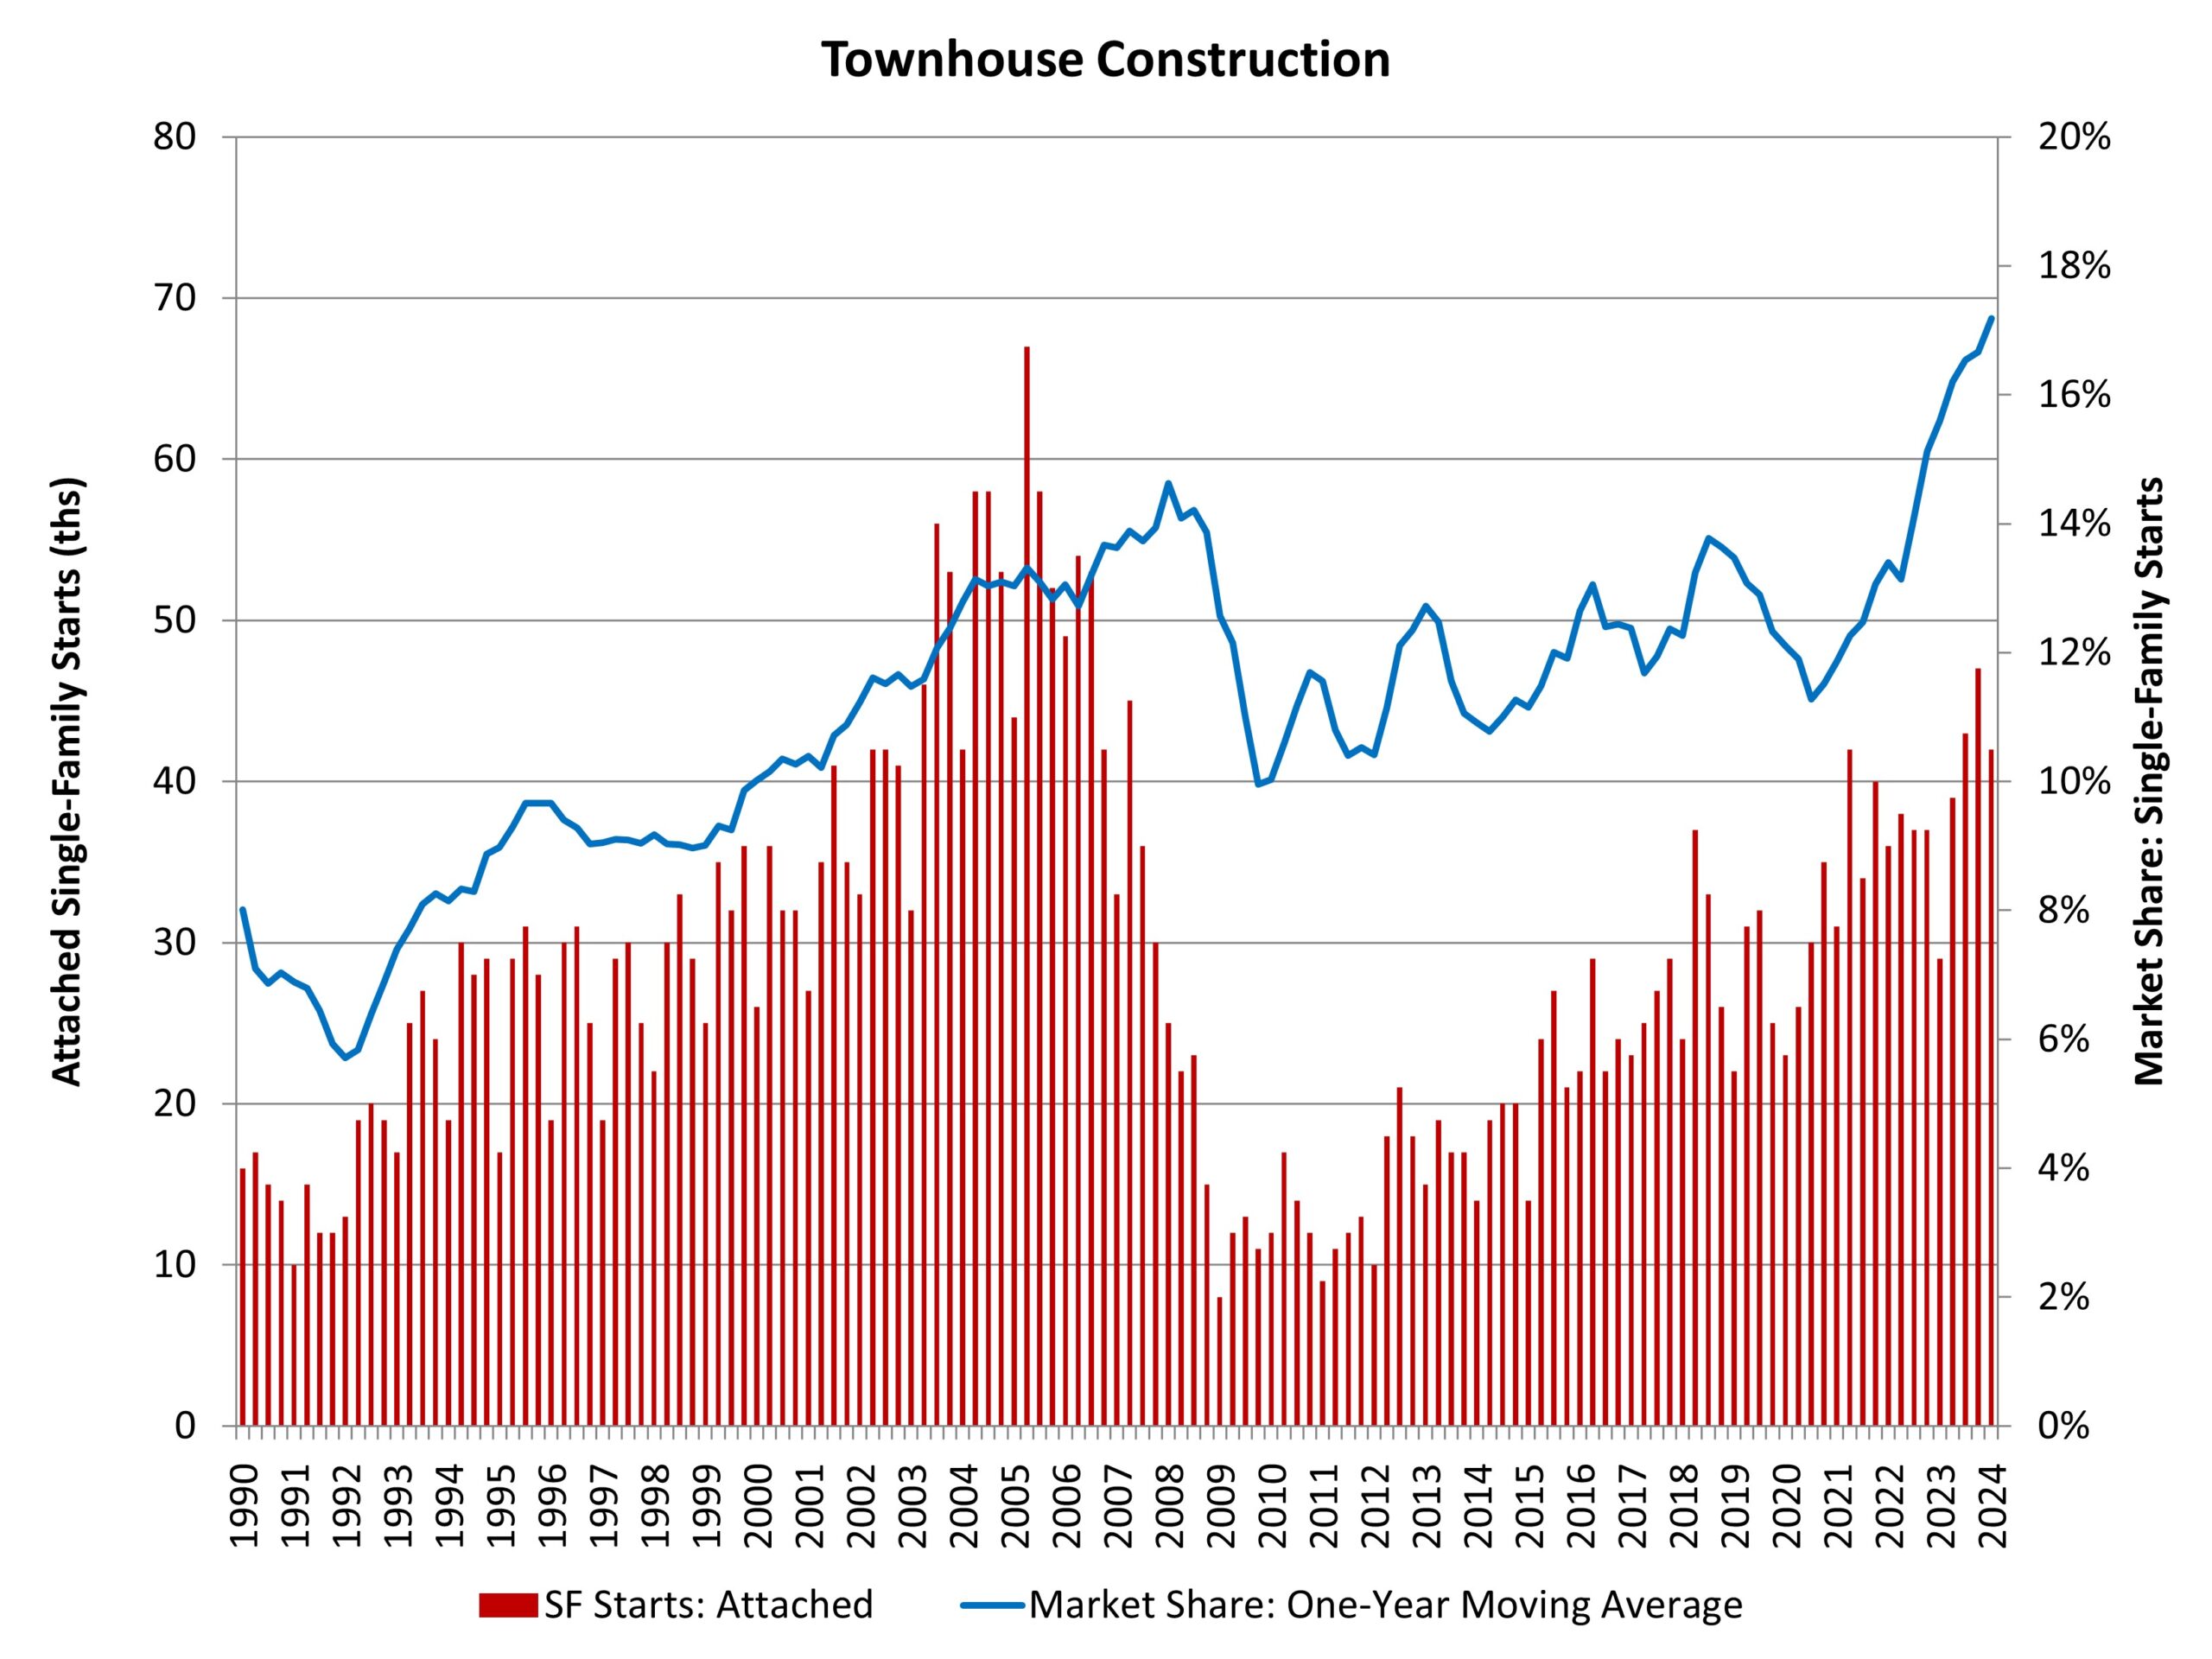 rewrite this title A Strong Quarter for Townhouse Construction